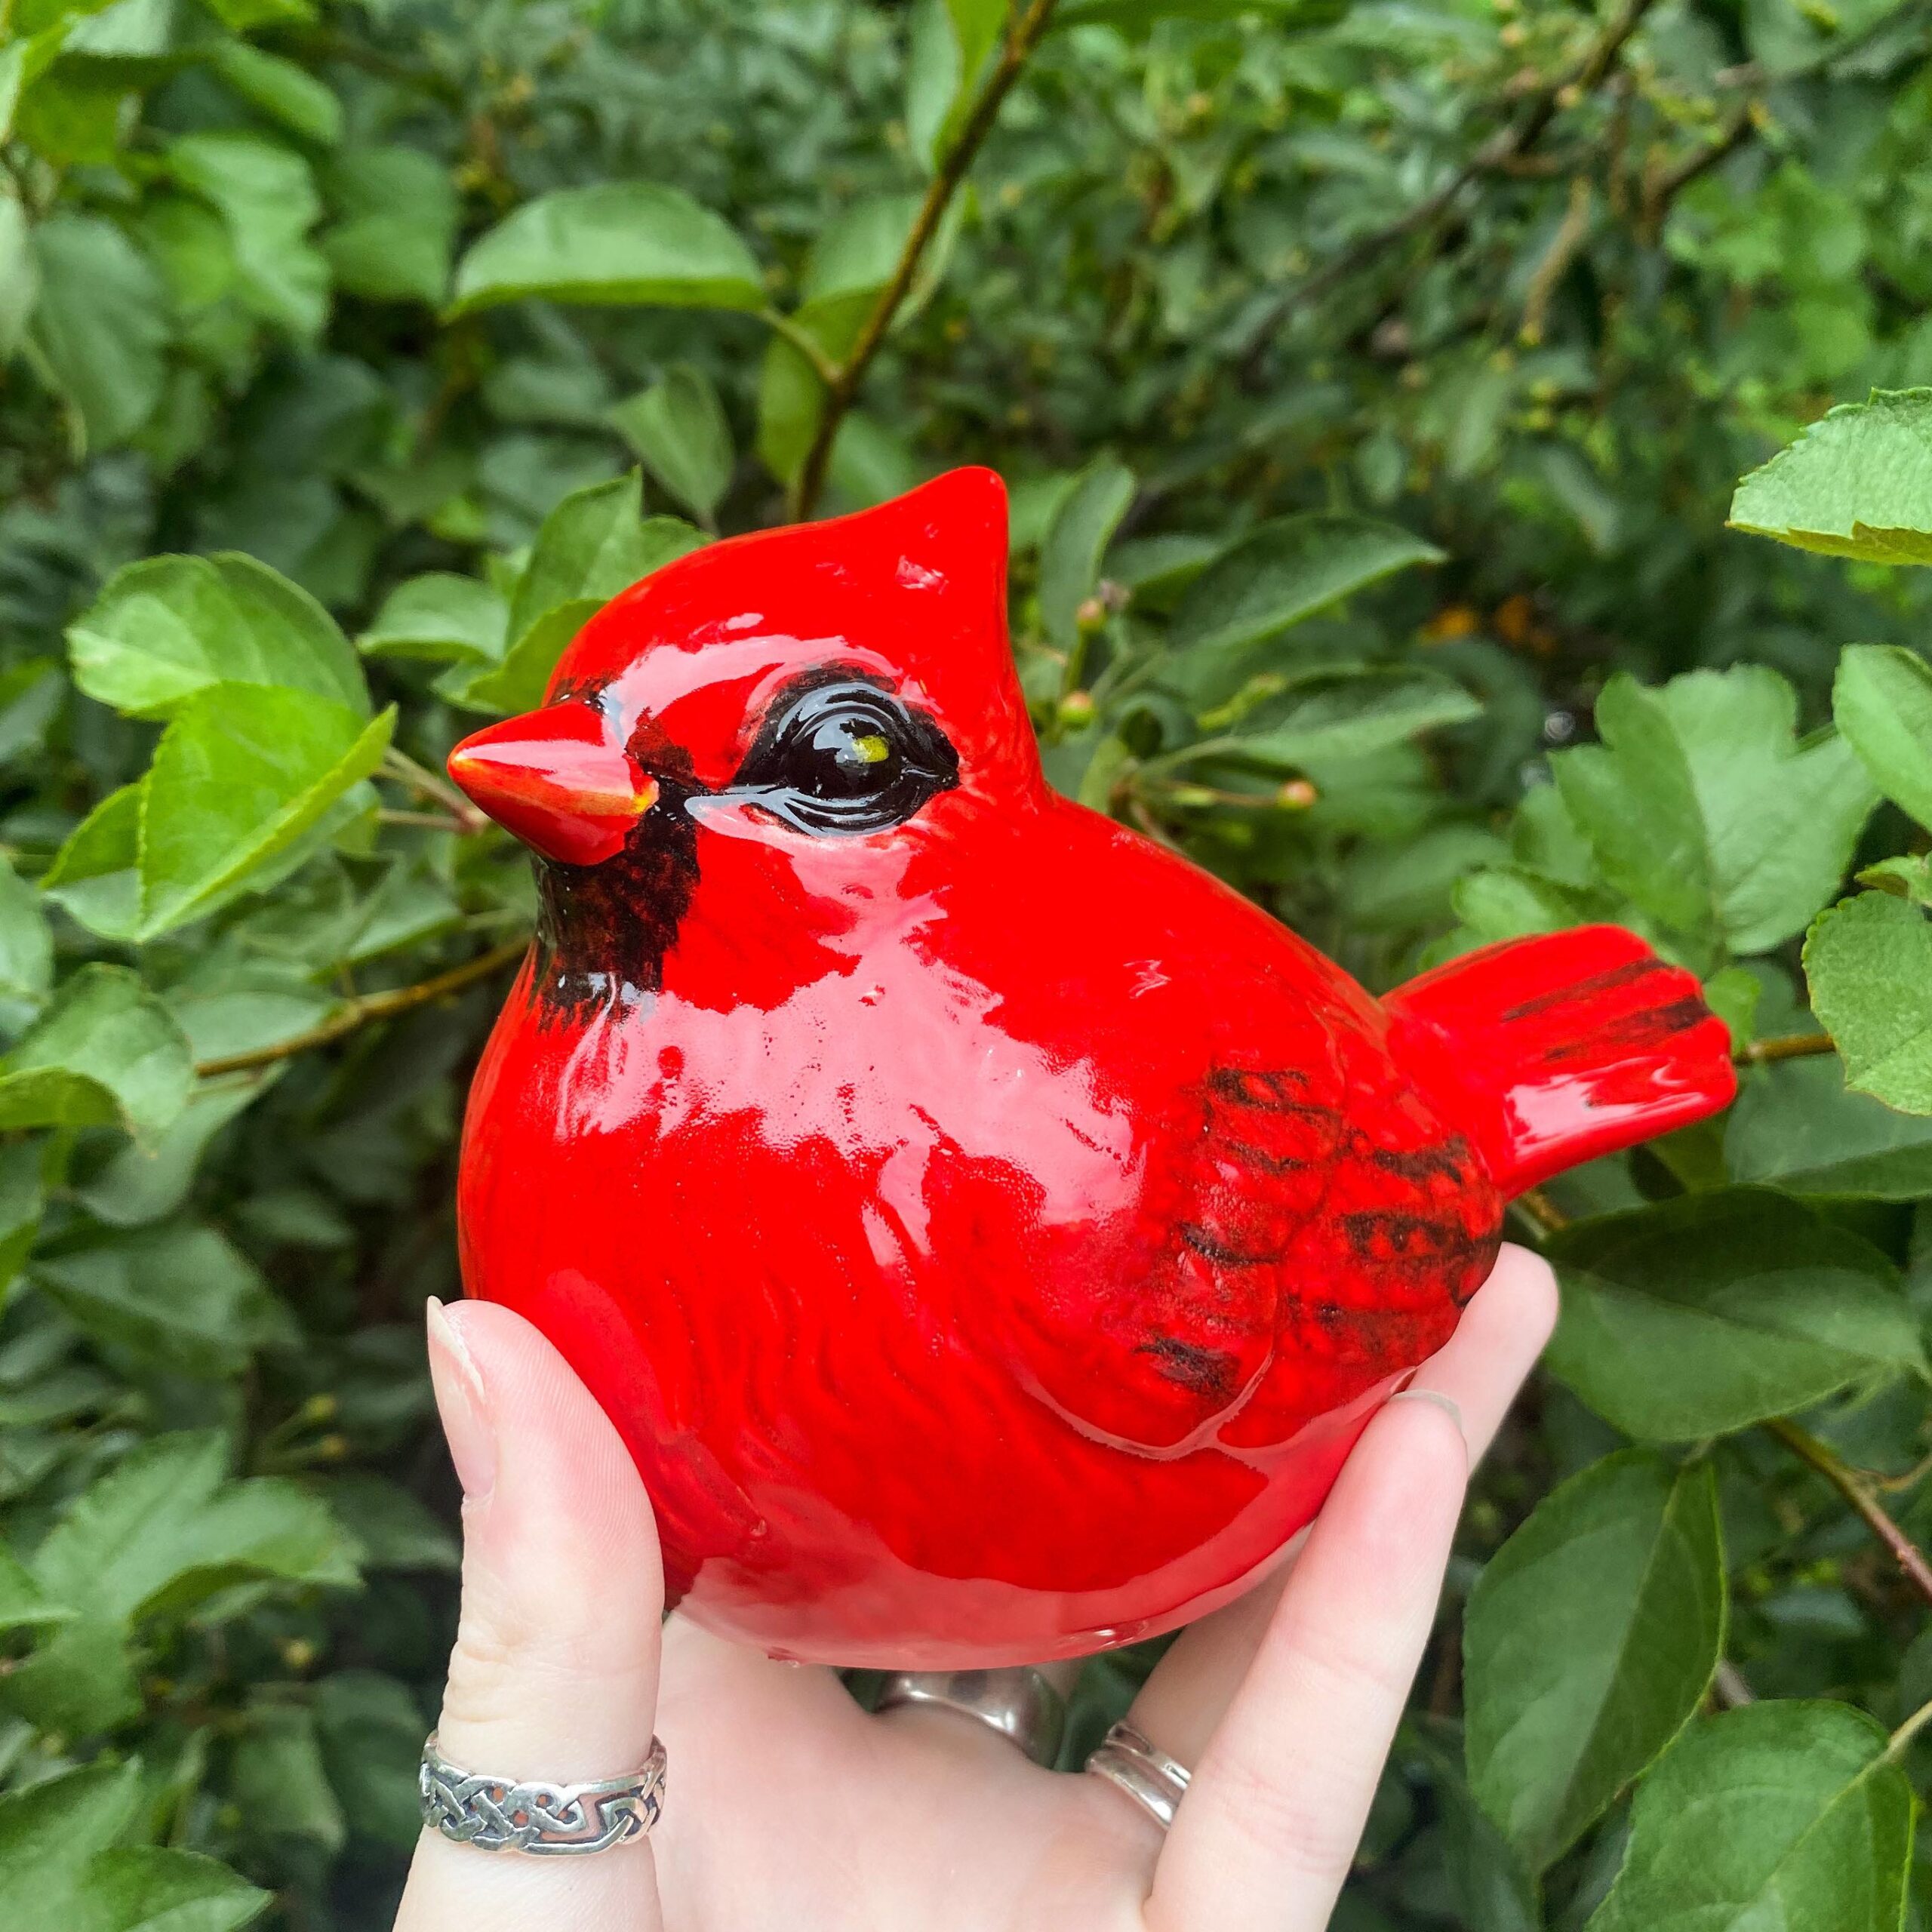 A person holding a red bird in their hand.